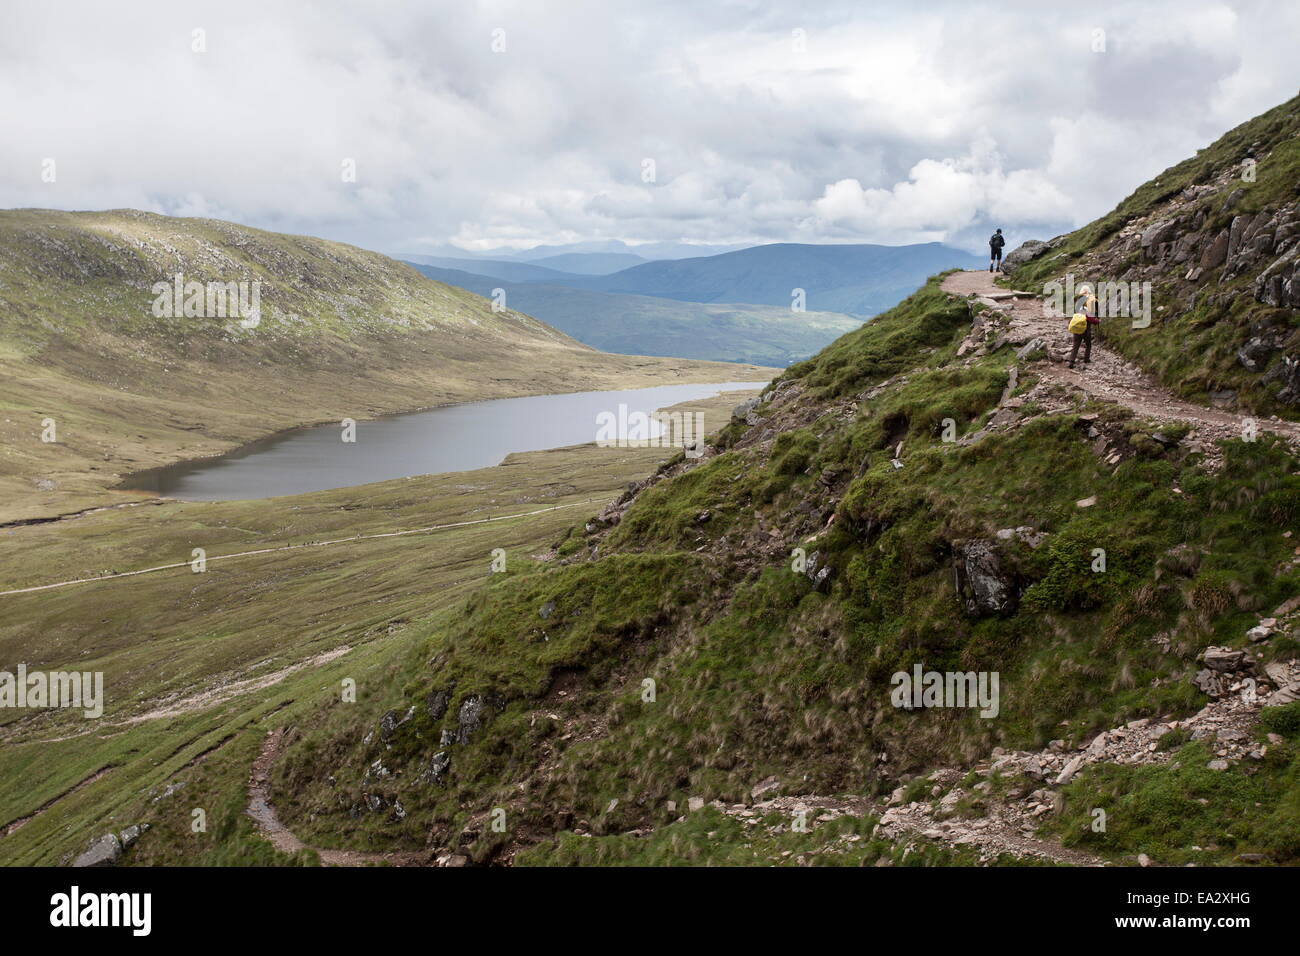 A view of Lochan Meal An T-suidhe, taken from the Mountain Track (Tourist Route), Ben Nevis, Highlands, Scotland, United Kingdom Stock Photo